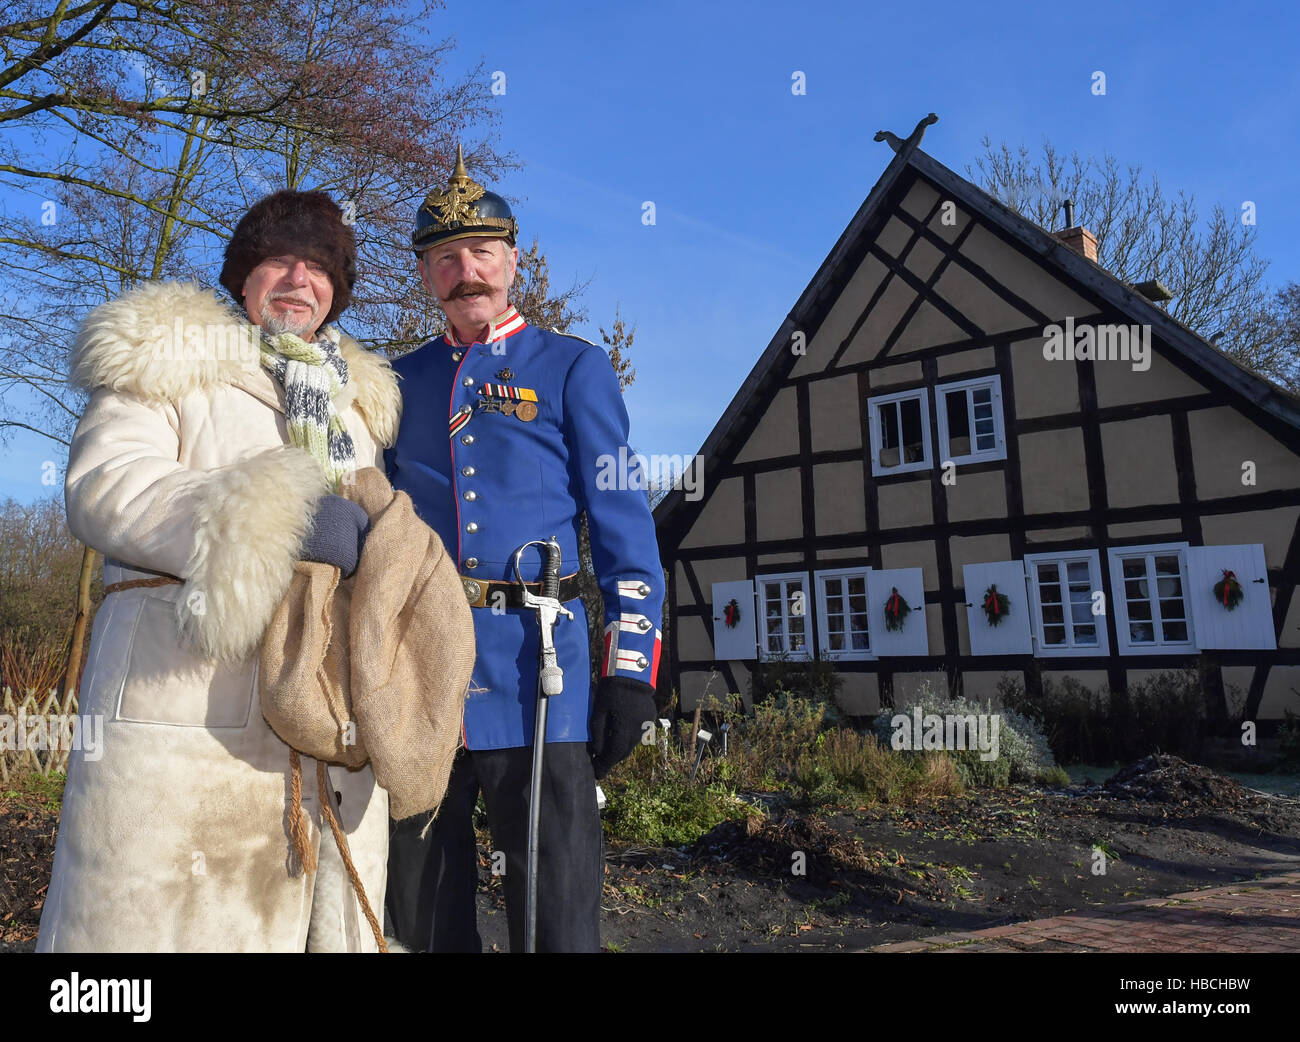 Lehde, Germany. 3rd Dec, 2016. Rumpodich (l), the Knecht Ruprecht (approx. Santa's little helper) of the Spreewald region, and Gendarm von Boblitz in conversation at the Christmas Market at the Freilandmuseum in the Spreewald village of Lehde, Germany, 3 December 2016. Visitors can visit the Christmas Market by barge and learn about the customs and traditions of the Spreewald's inhabitants. Photo: Patrick Pleul/dpa-Zentralbild/ZB/dpa/Alamy Live News Stock Photo